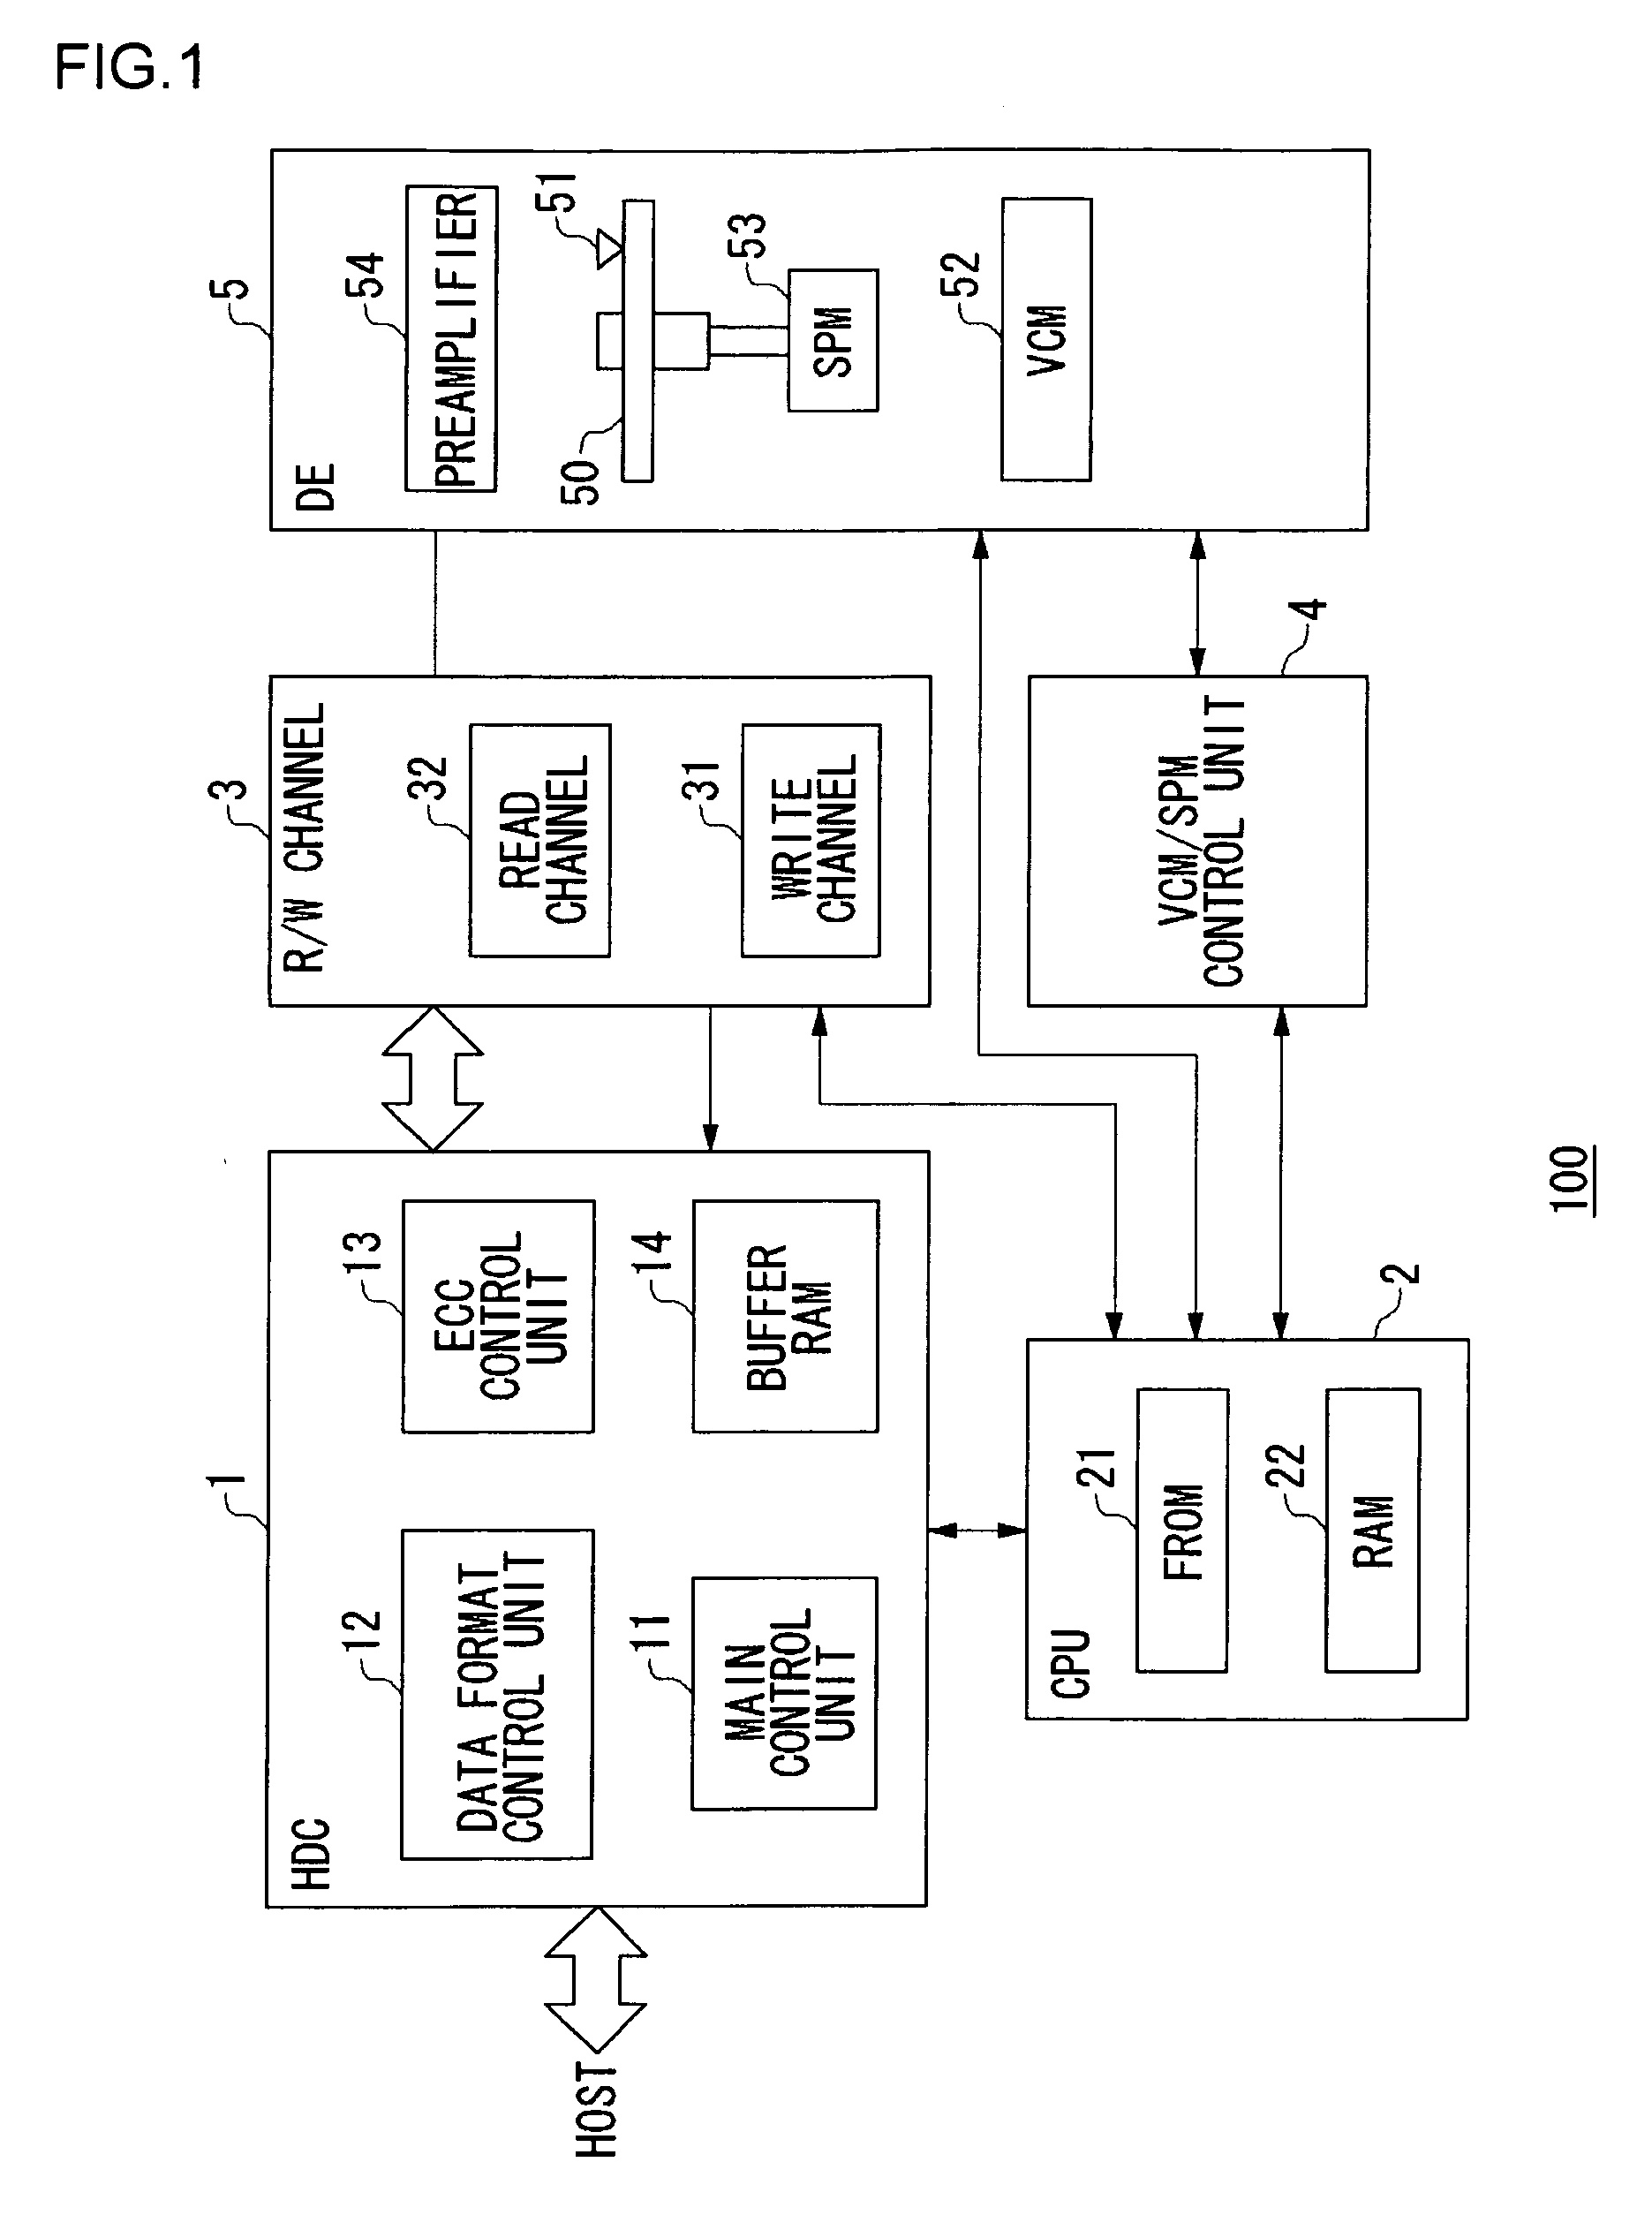 Signal processing apparatus, signal processing method and storage system